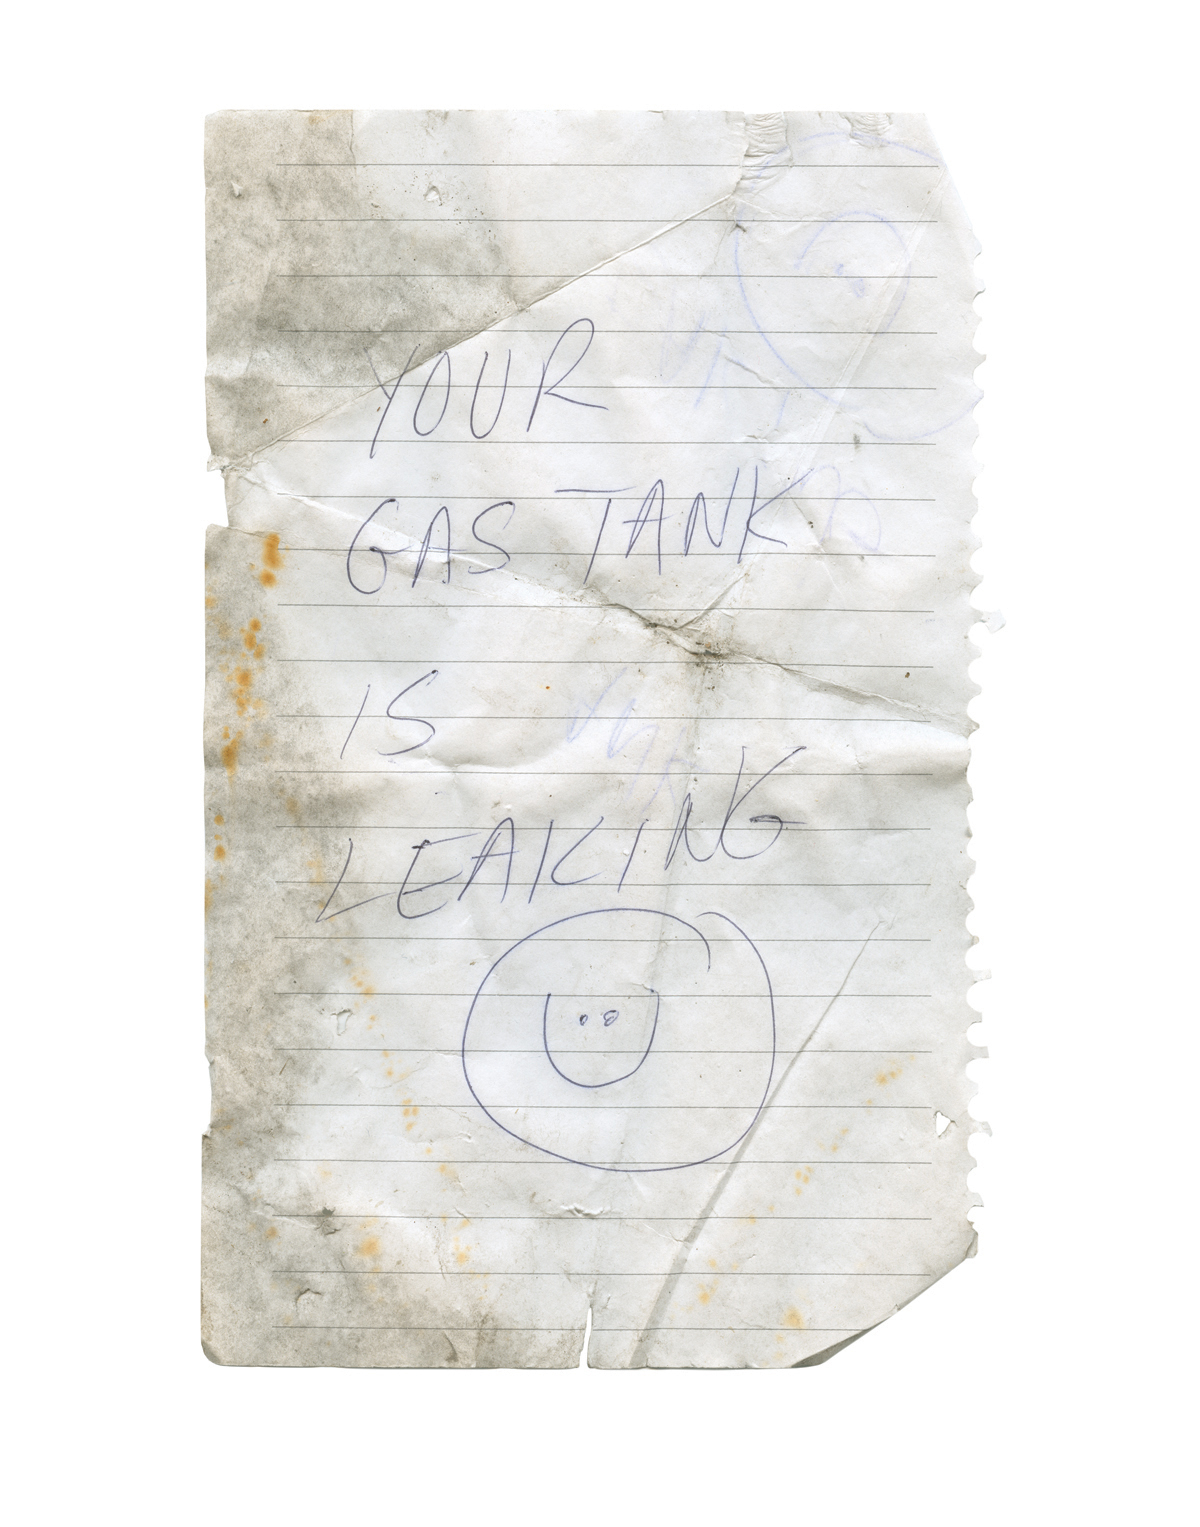     Paige Lindsay, Leak, 2015. Found note/scan, dimensions variable.

